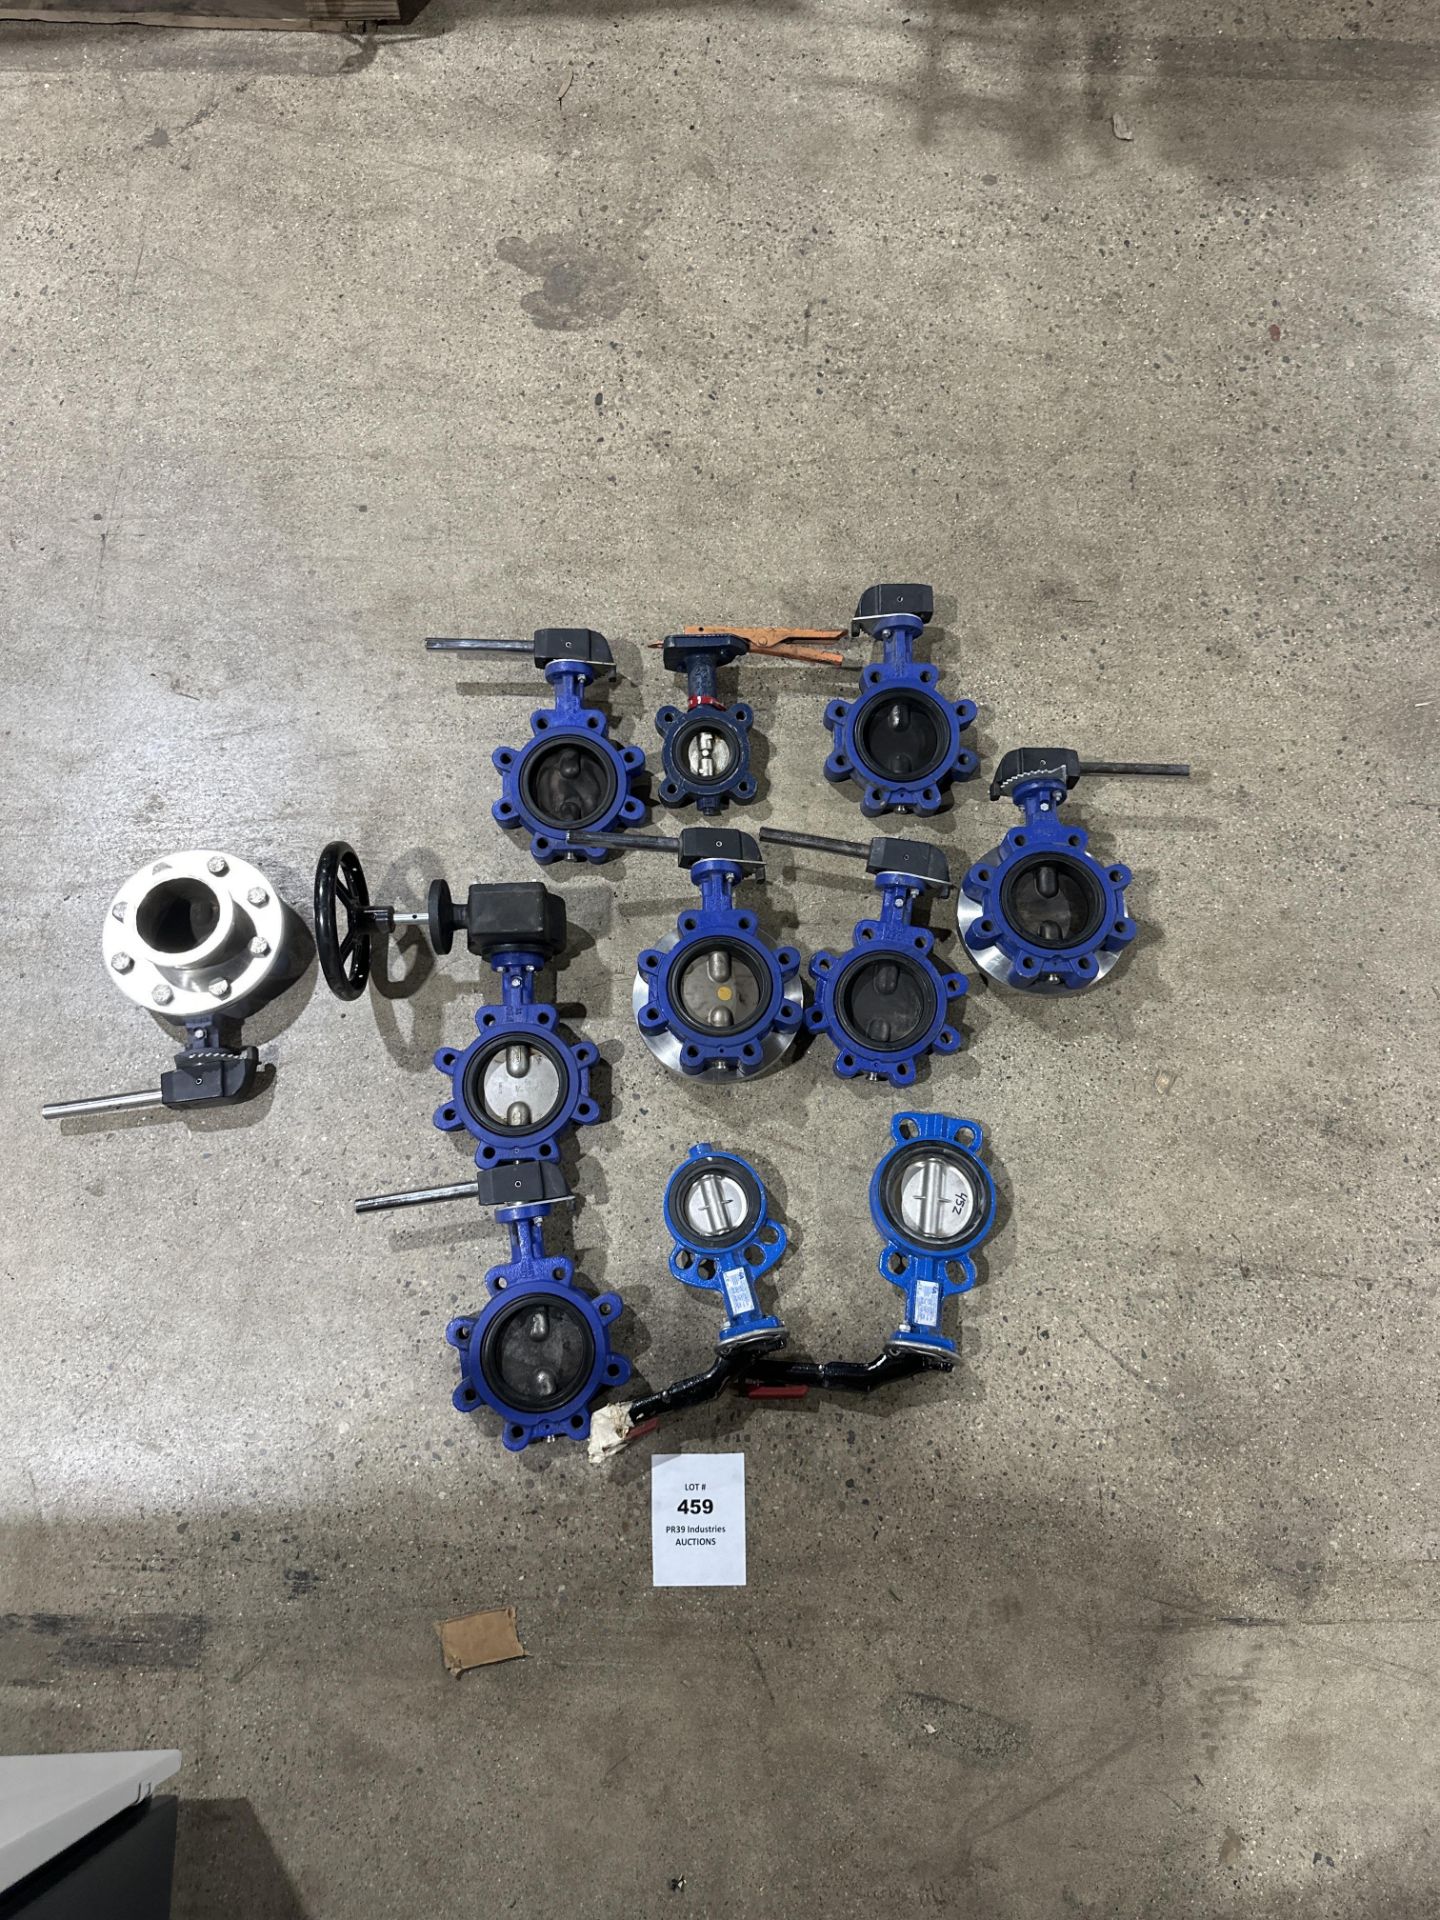 LOT OF 11 MISC BUTTERFLY VALVES WAFER STYLE AND LUG STYLE ALL EXCELLENT CONDITION.